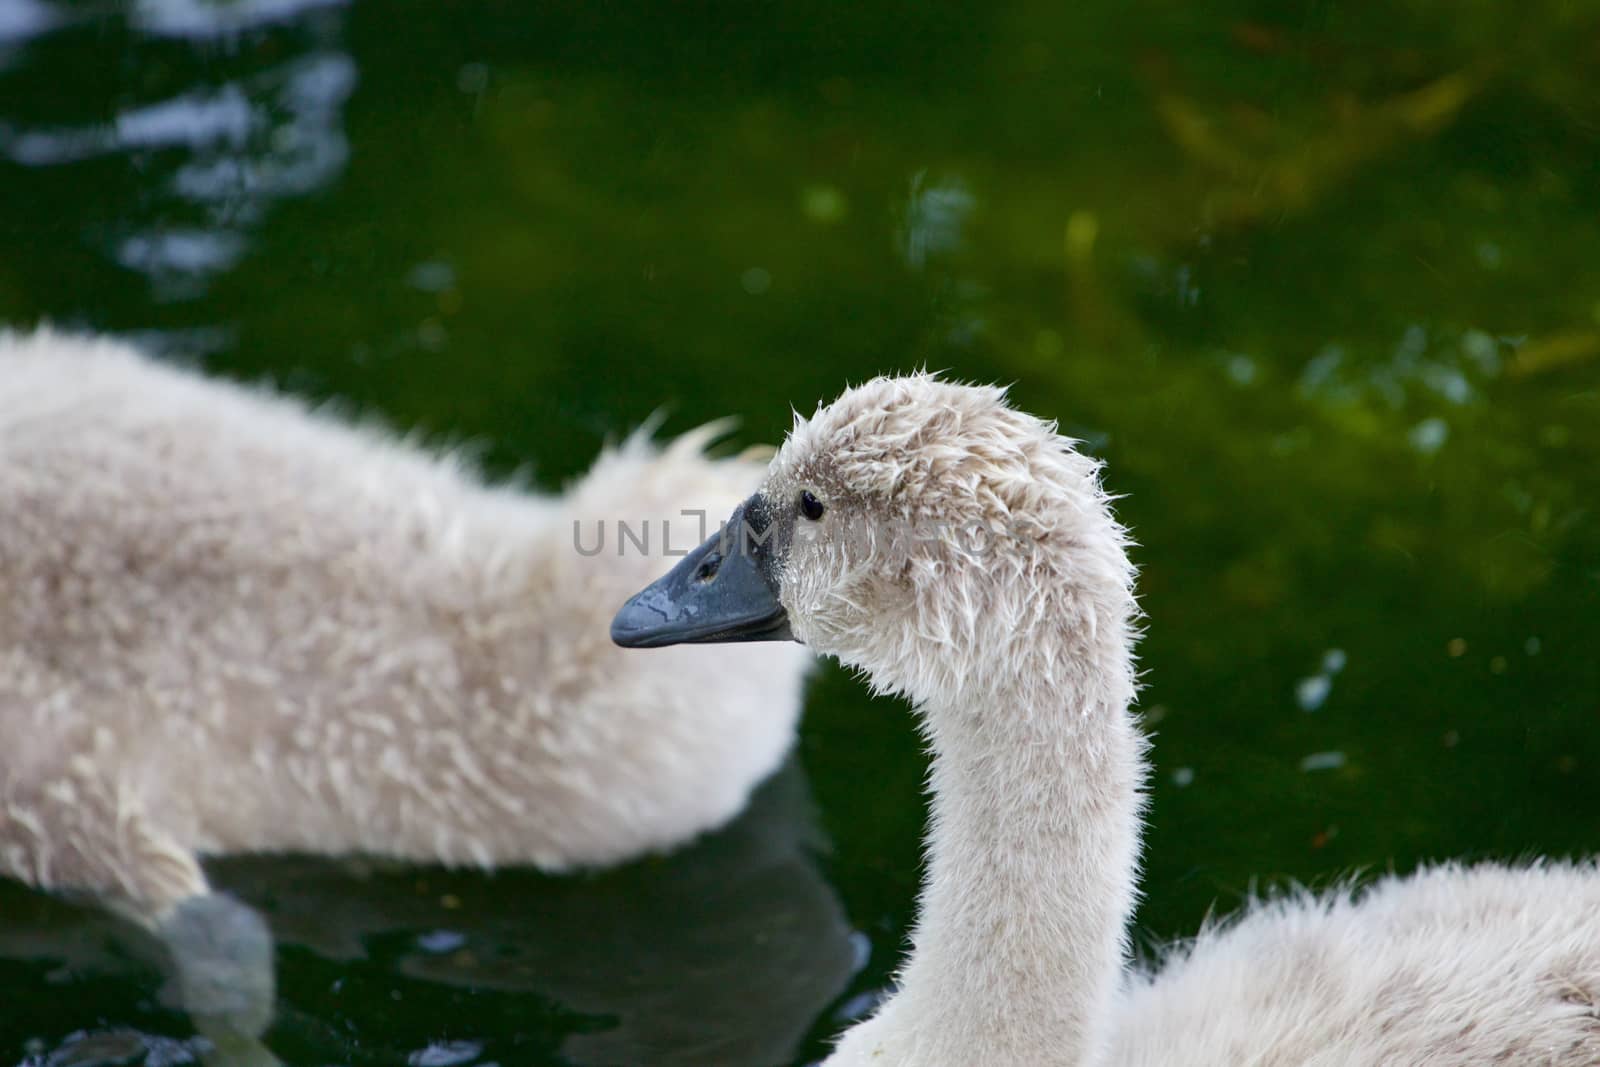 The young mute swan in the lake